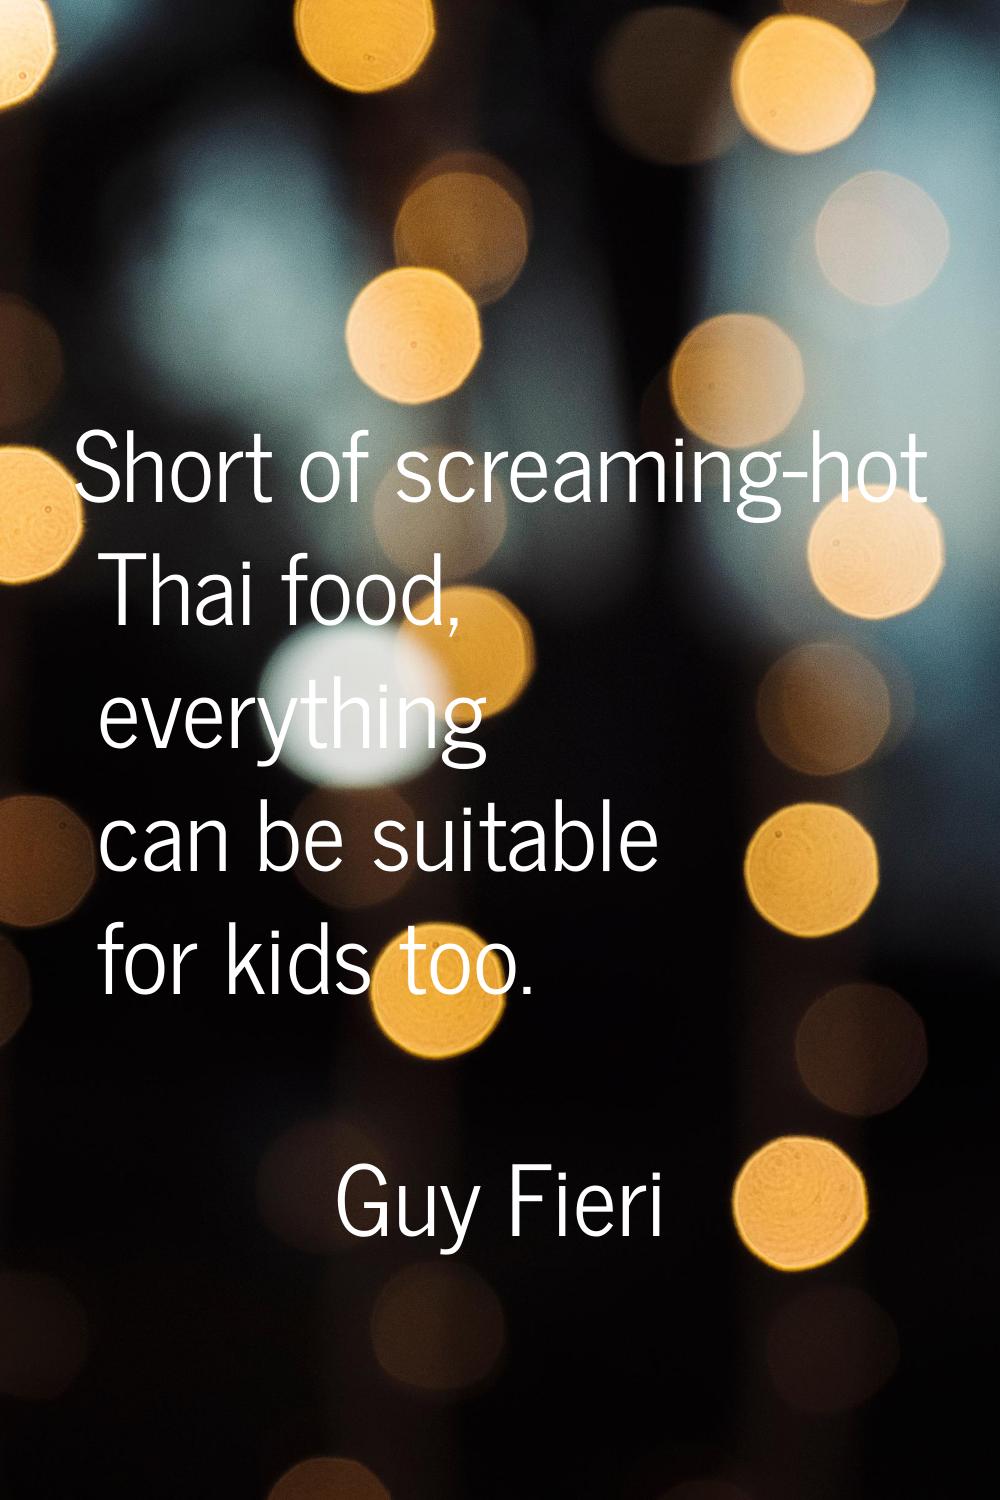 Short of screaming-hot Thai food, everything can be suitable for kids too.